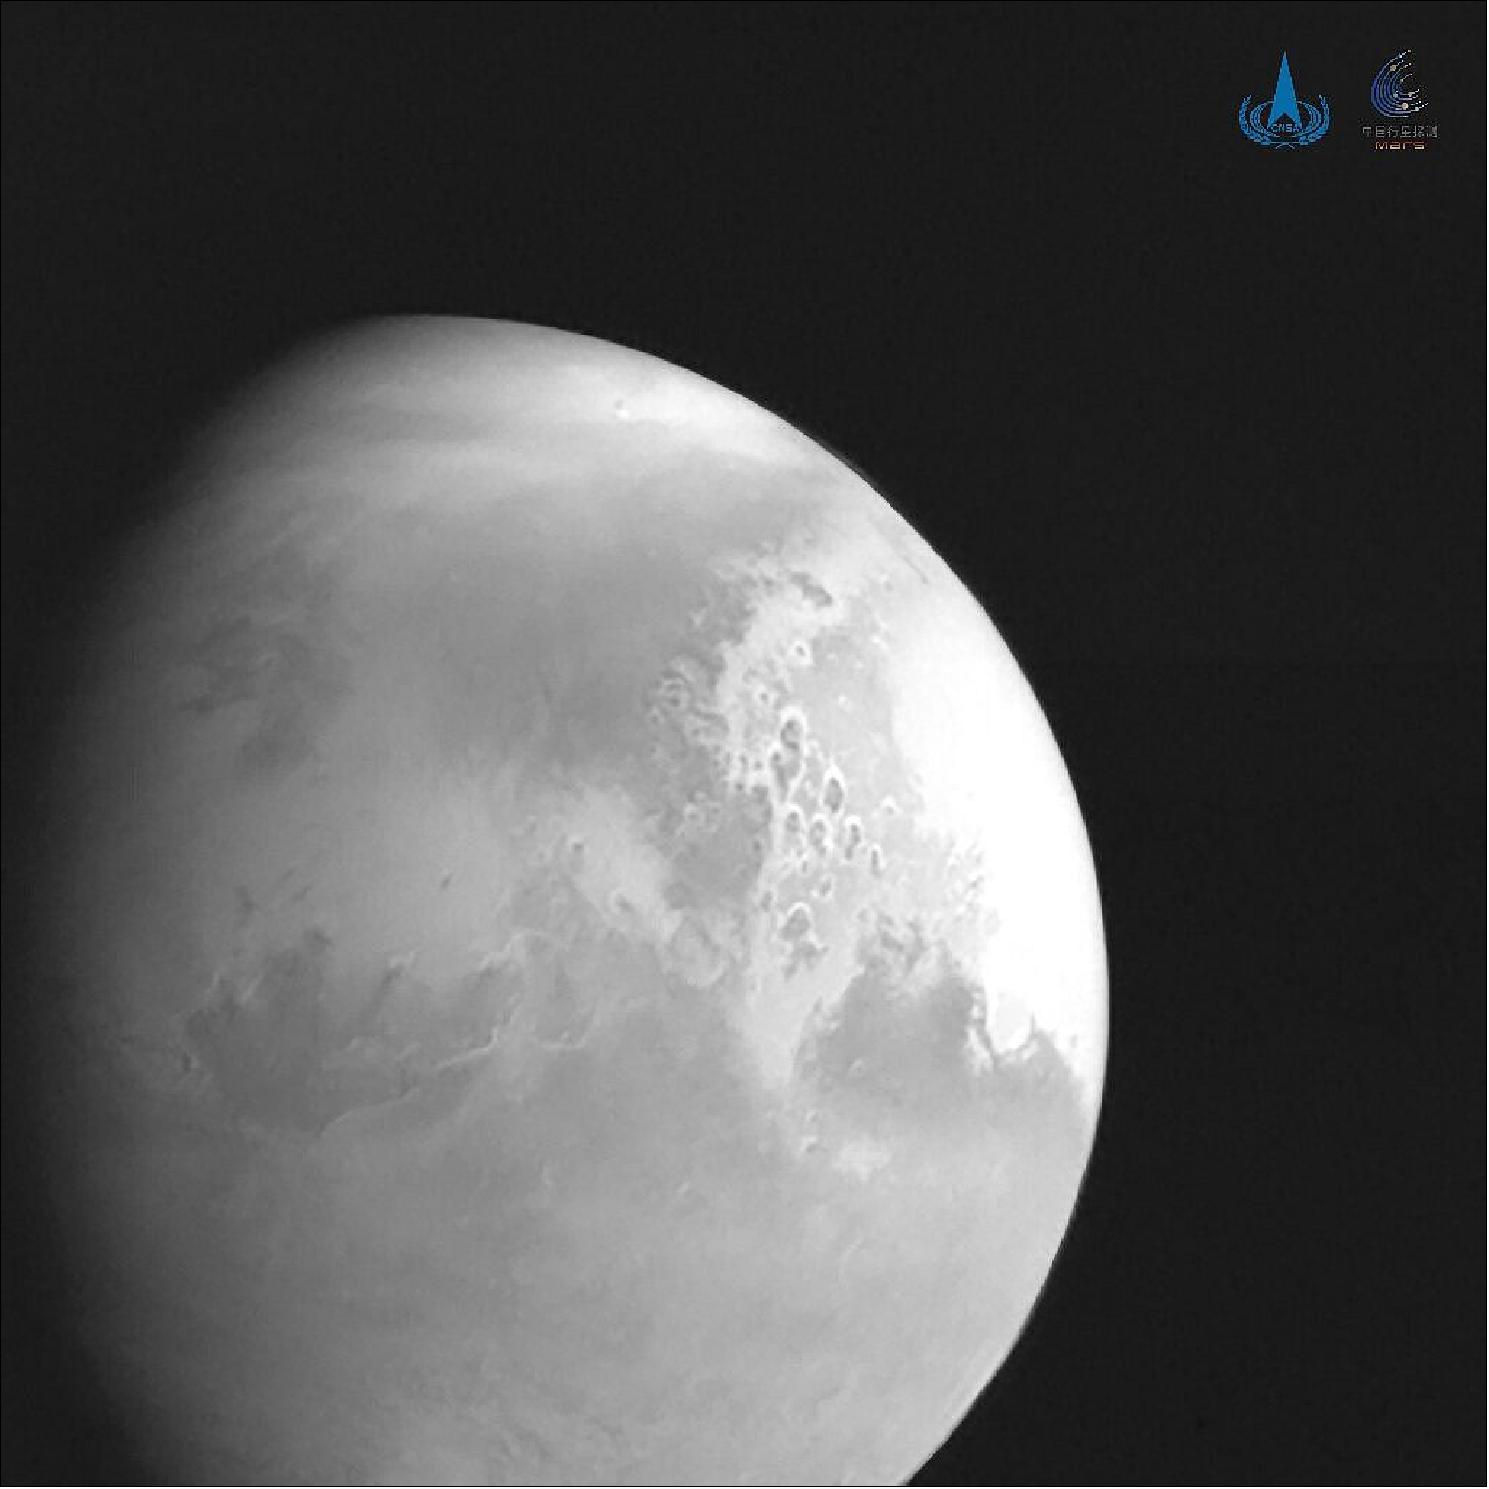 Figure 29: China's space probe has sent back its first image of Mars and is scheduled to touch down on the Red Planet later this year (image credit: CNSA)